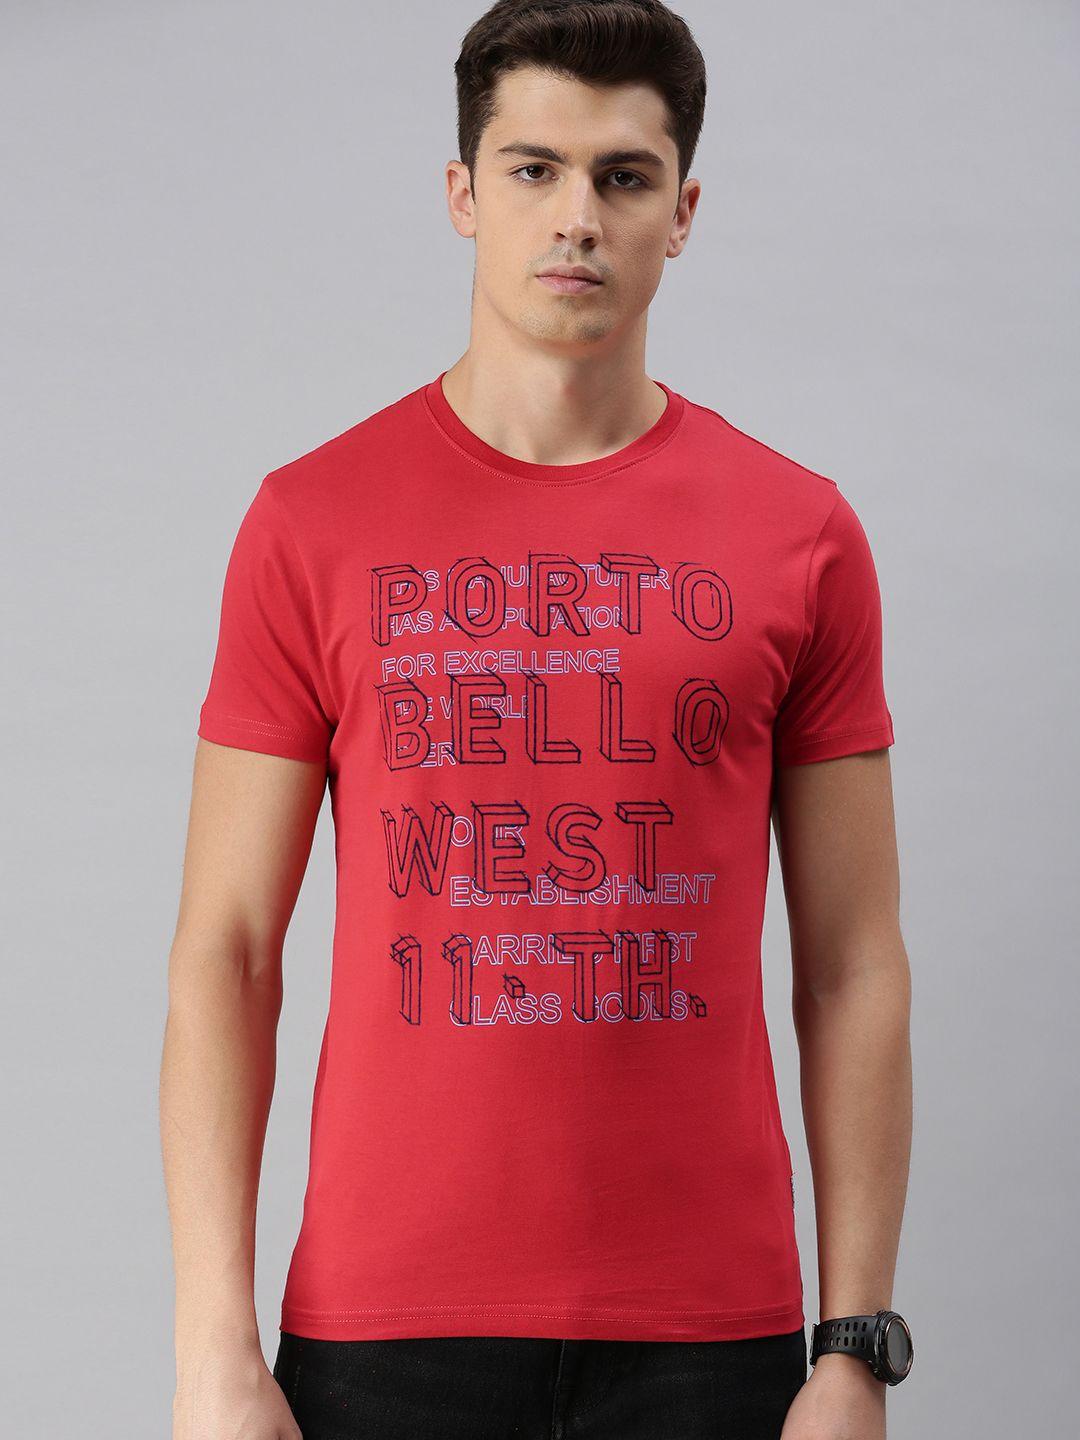 beat london by pepe jeans men red printed slim fit round neck pure cotton t-shirt